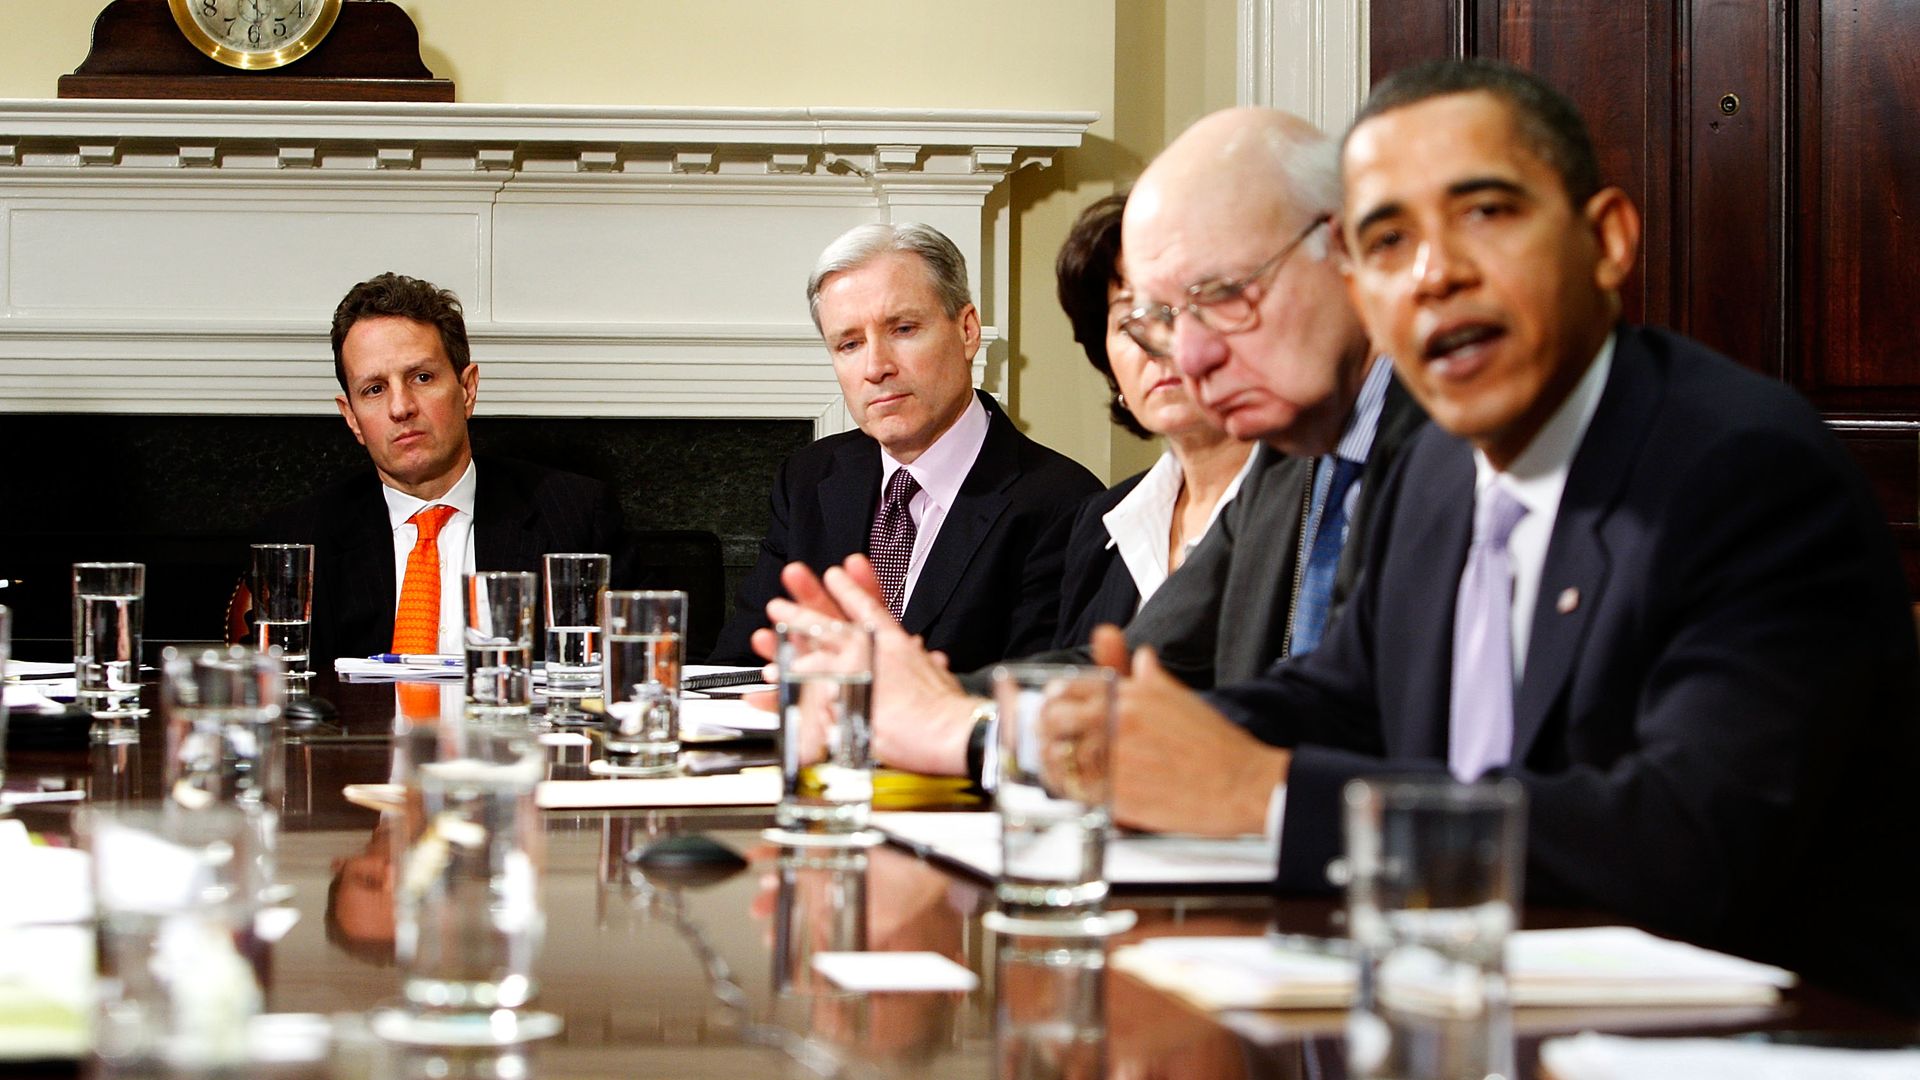 Mark Gallogly is seen in a photo near President Obama.